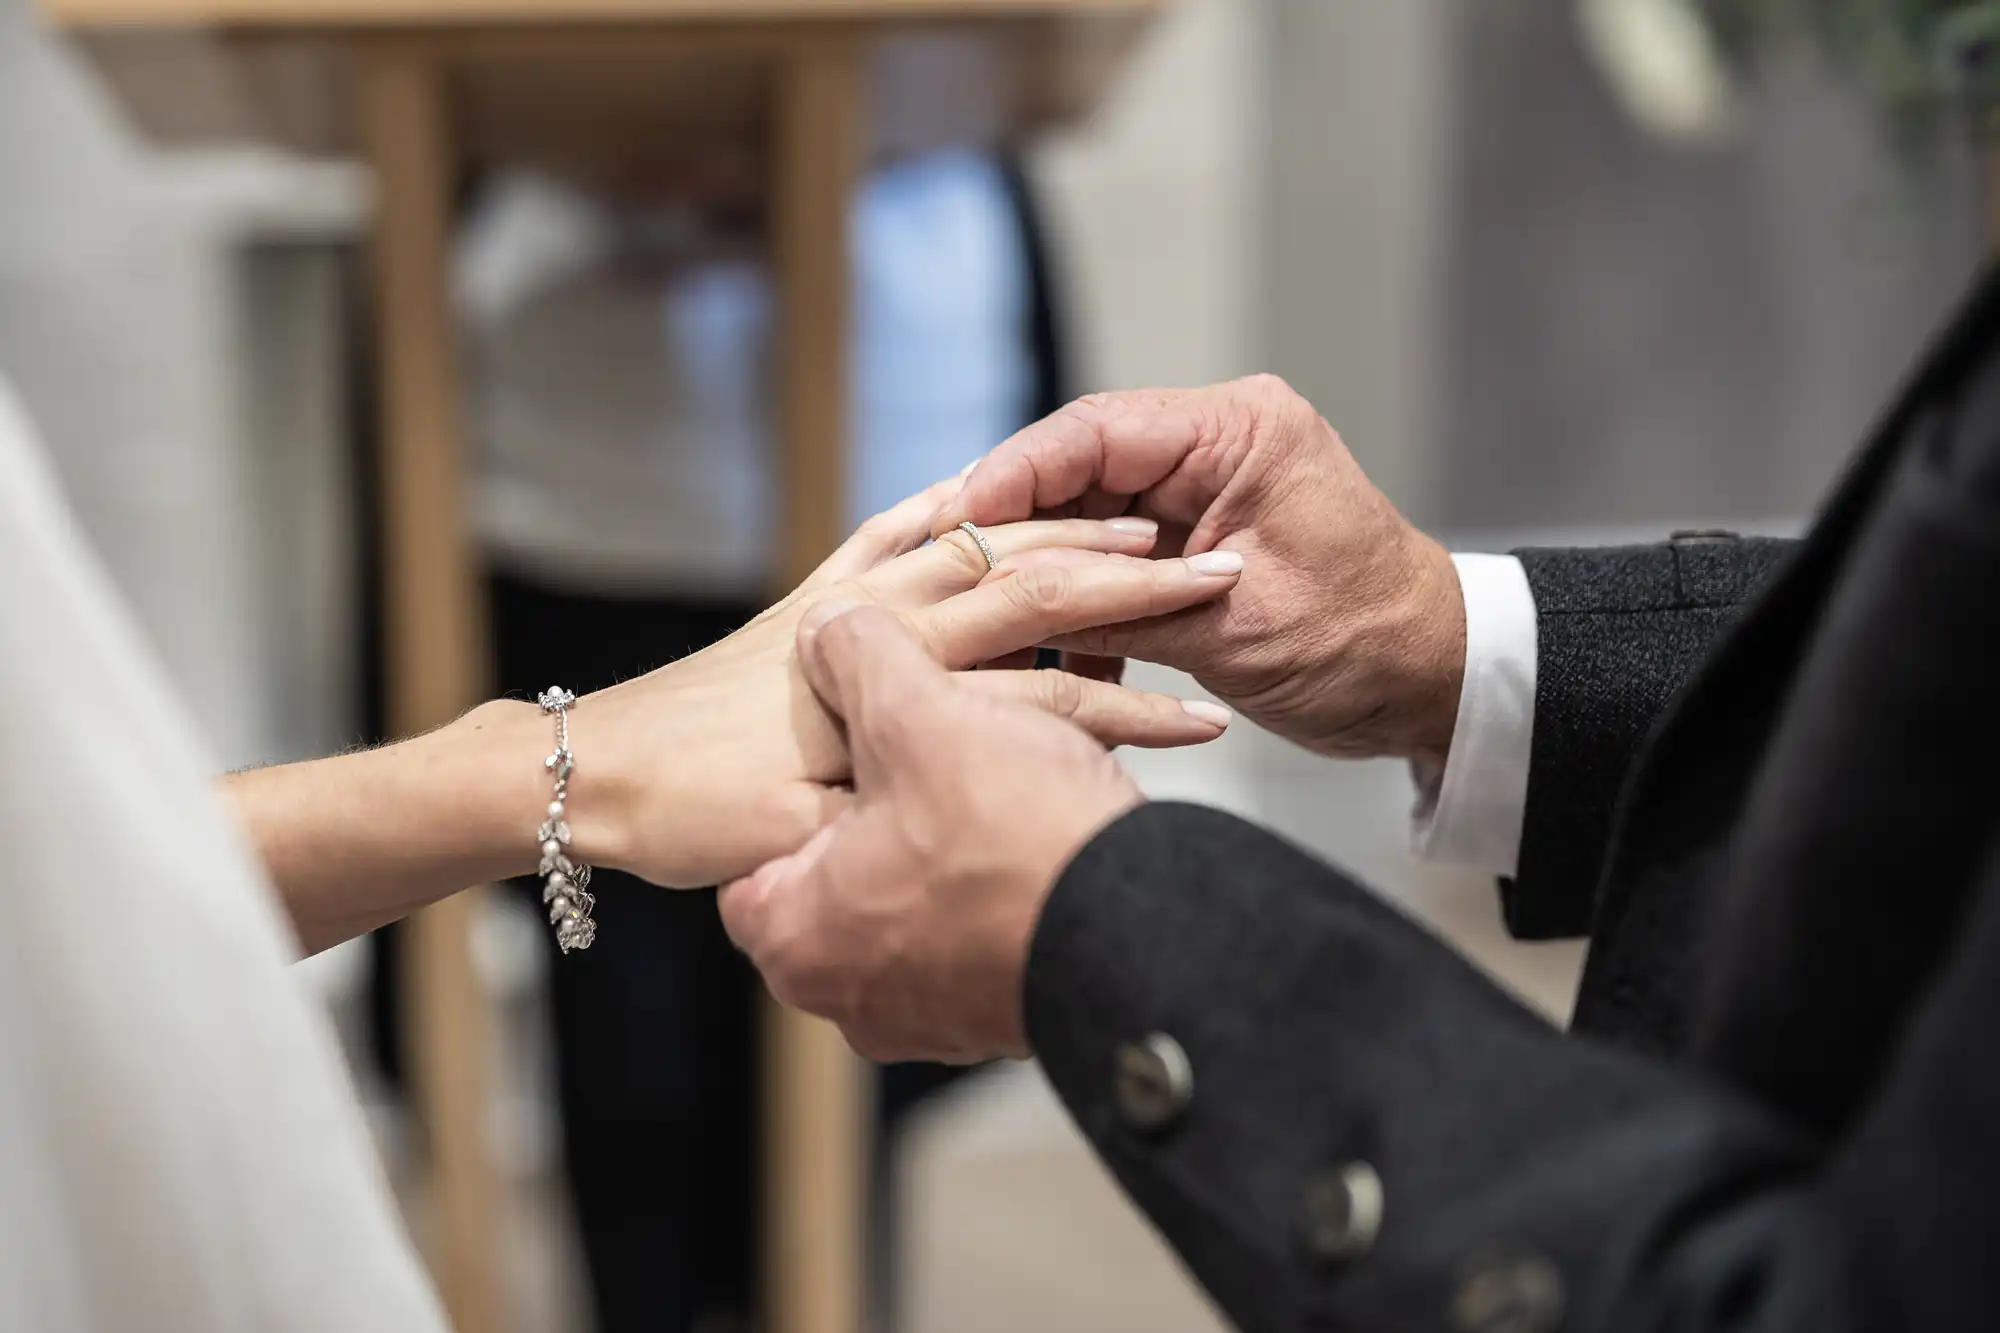 Close-up of a person placing a ring on another person's finger during a ceremony. The focus is on their hands, with one person wearing a bracelet and the other in a dark suit.